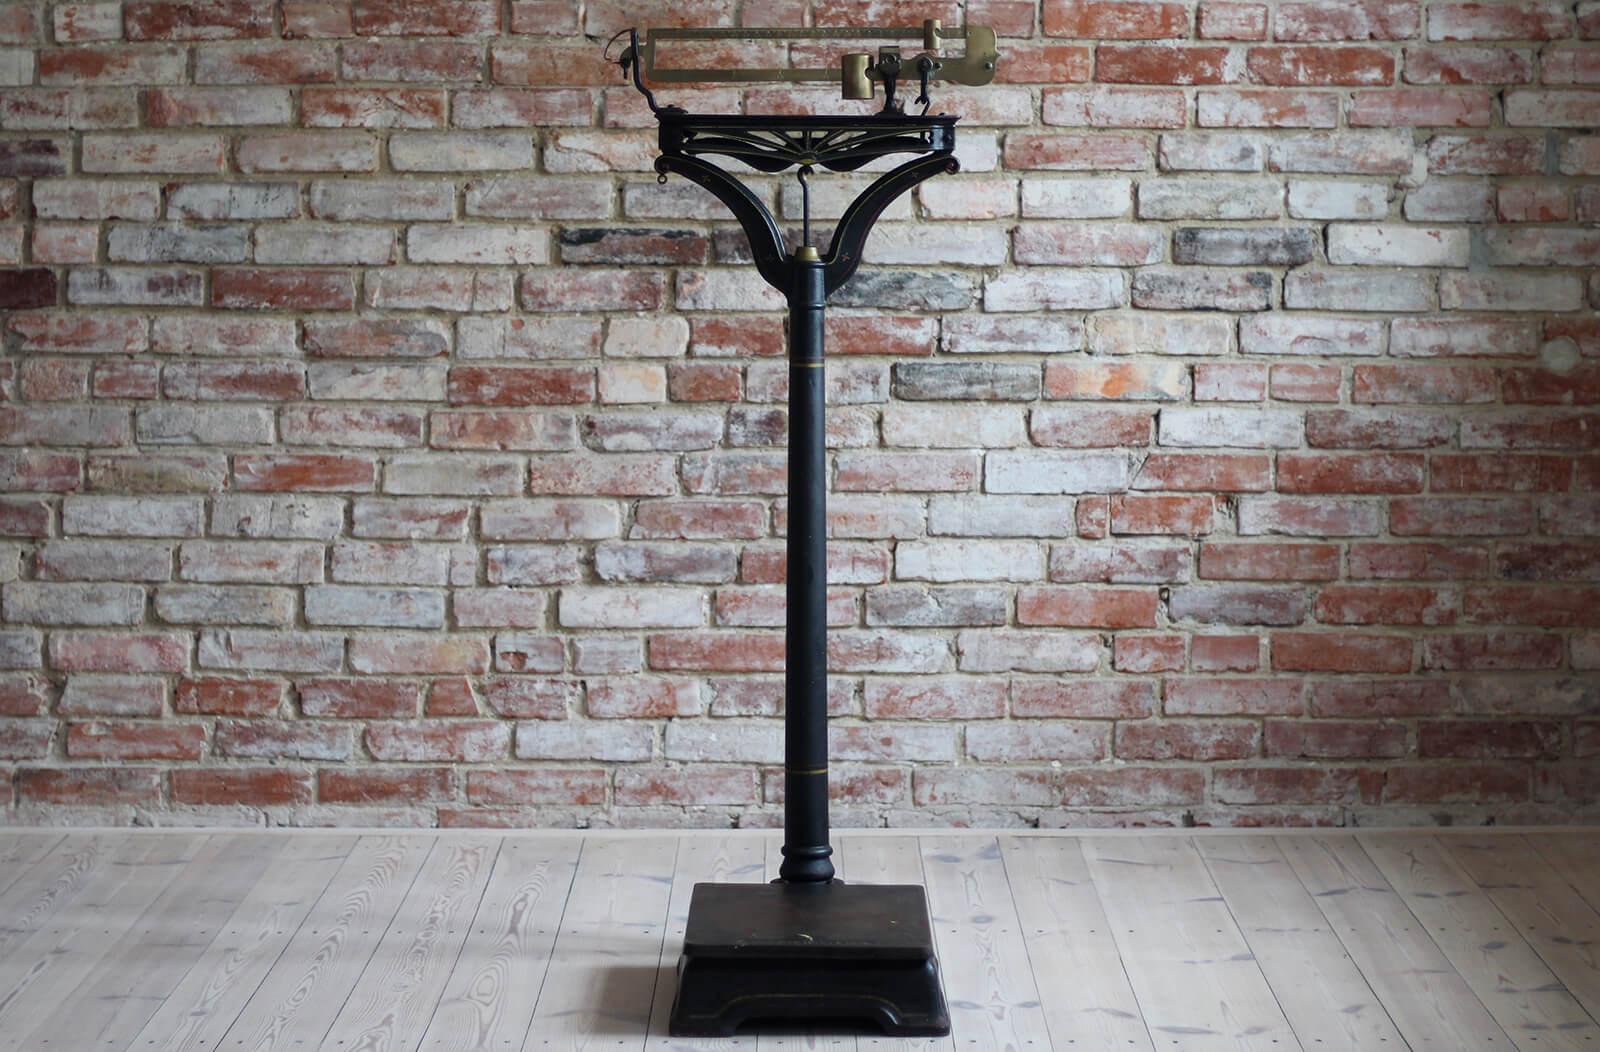 This scale was produced by the world-famous company Fairbanks, which has been operating continuously since 1830 until today. Fairbanks is definitely one of the brands that helped bring the U.S. into the era of industrialization. This Victorian-style